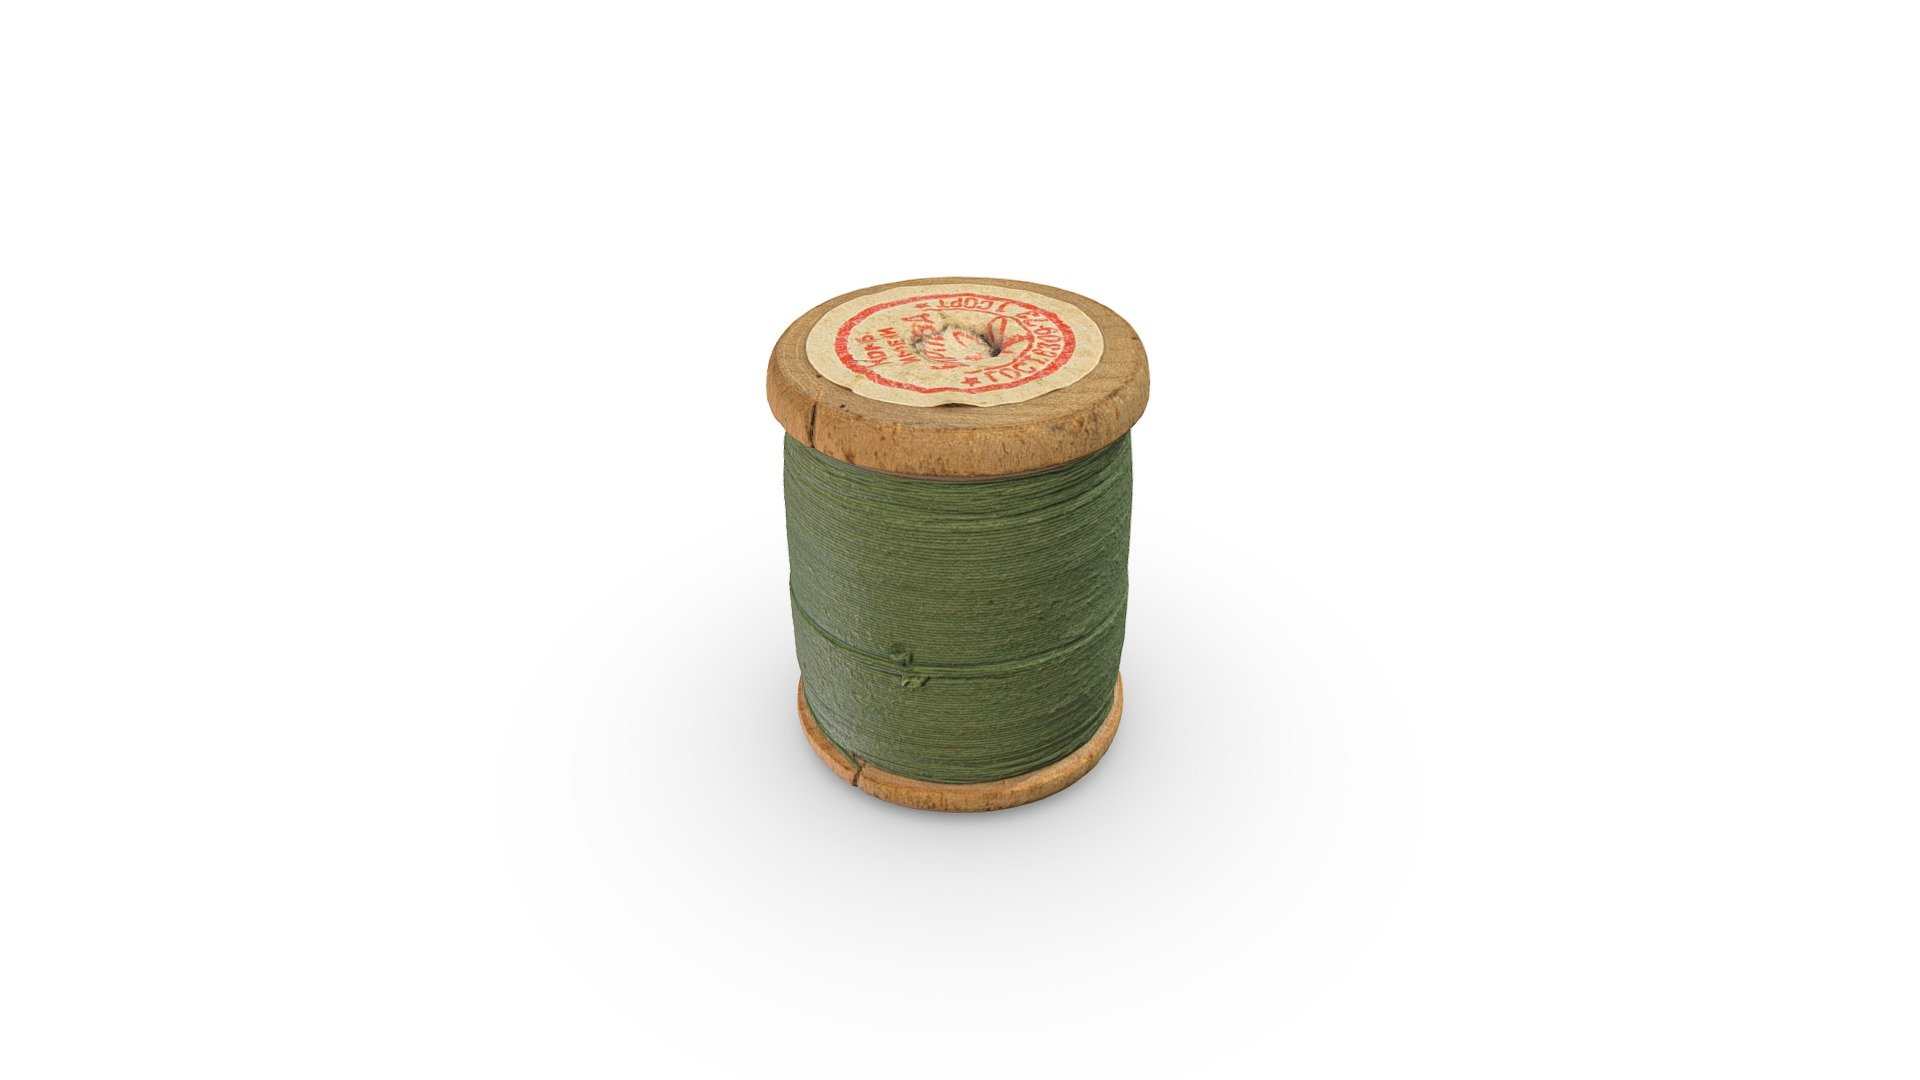 High-poly spool of green thread photogrammetry scan. PBR texture maps 4096x4096 px. resolution for metallic or specular workflow. Scan from real thread, high-poly 3D model, 4K resolution textures 3d model